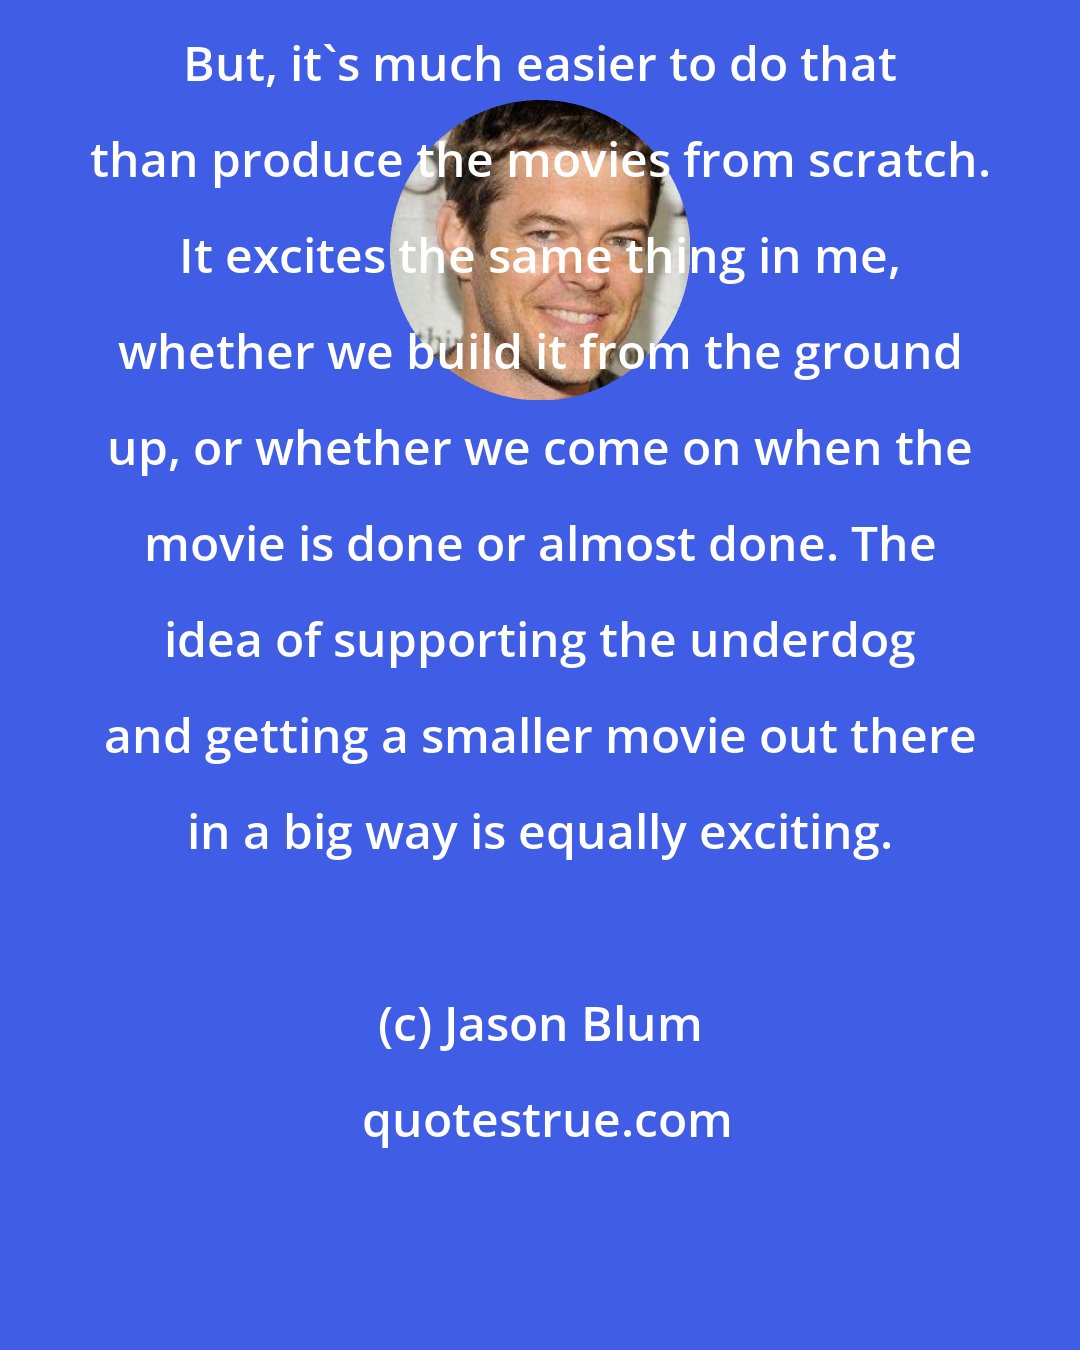 Jason Blum: But, it's much easier to do that than produce the movies from scratch. It excites the same thing in me, whether we build it from the ground up, or whether we come on when the movie is done or almost done. The idea of supporting the underdog and getting a smaller movie out there in a big way is equally exciting.